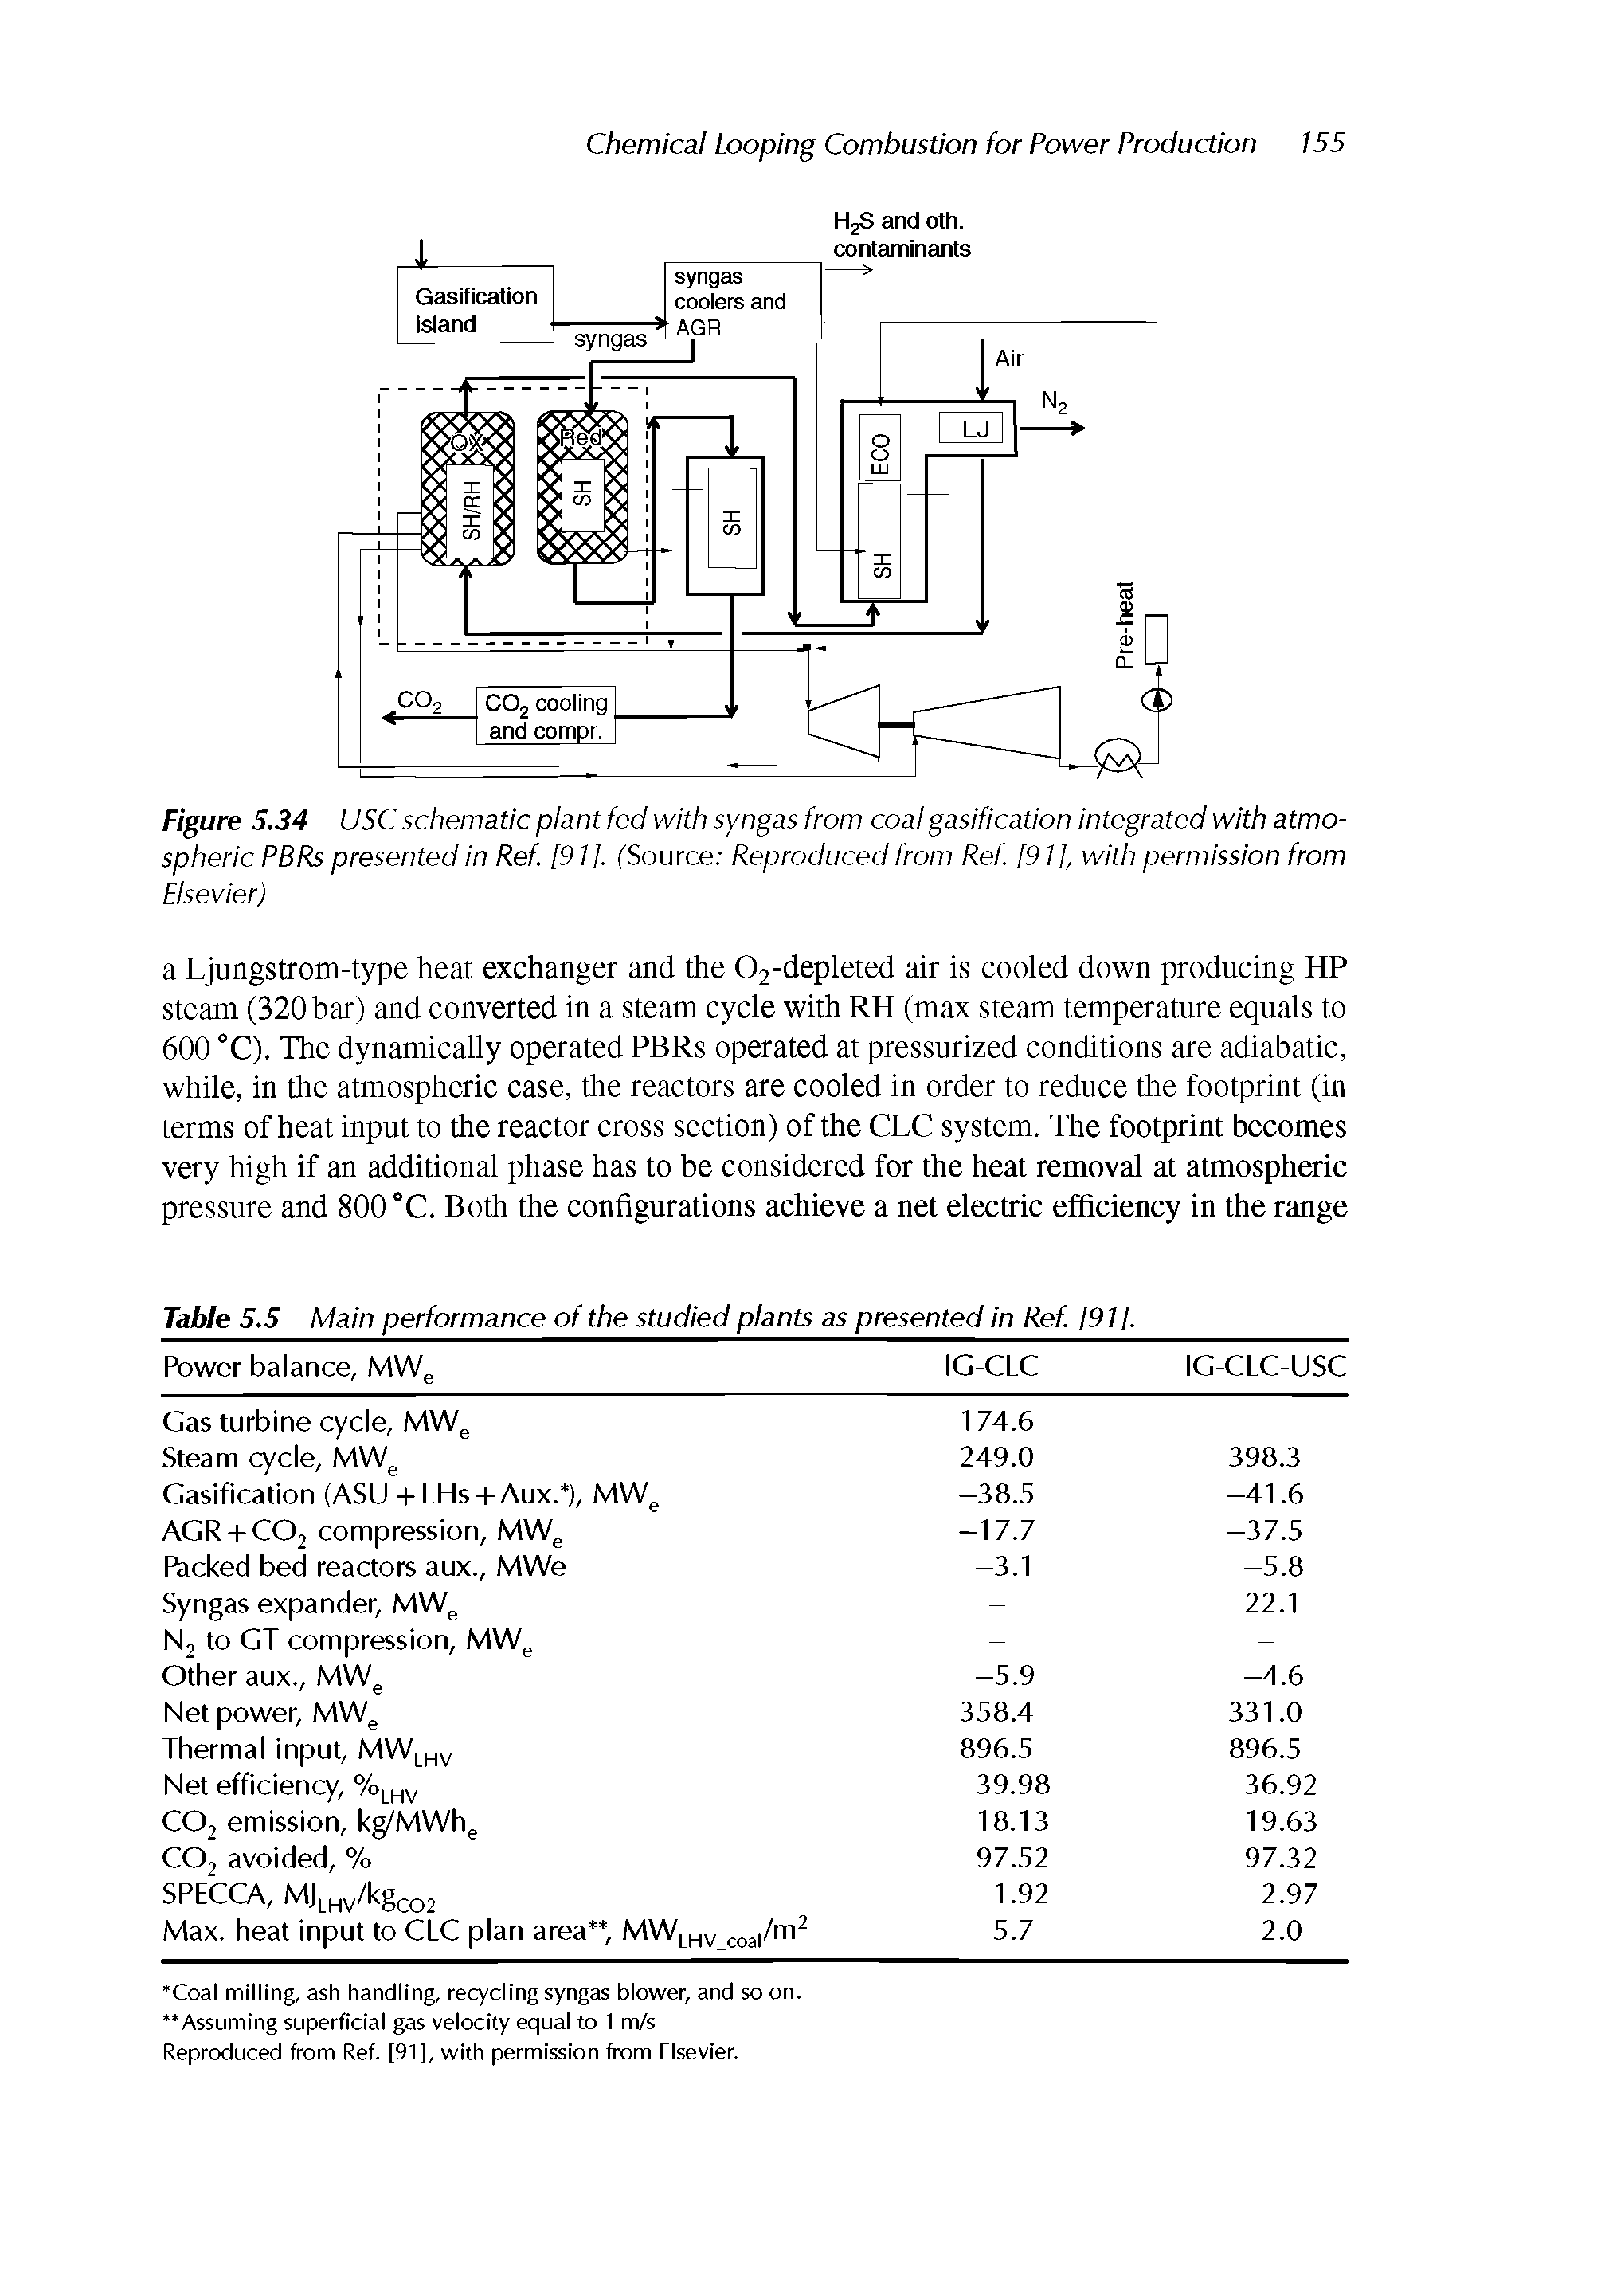 Figure 5.34 (JSC schematic plant fed with syngas from coal gasification integrated with atmospheric PBRs presented in Ref [91 ]. fSource Reproduced from Ref [911, with permission from...